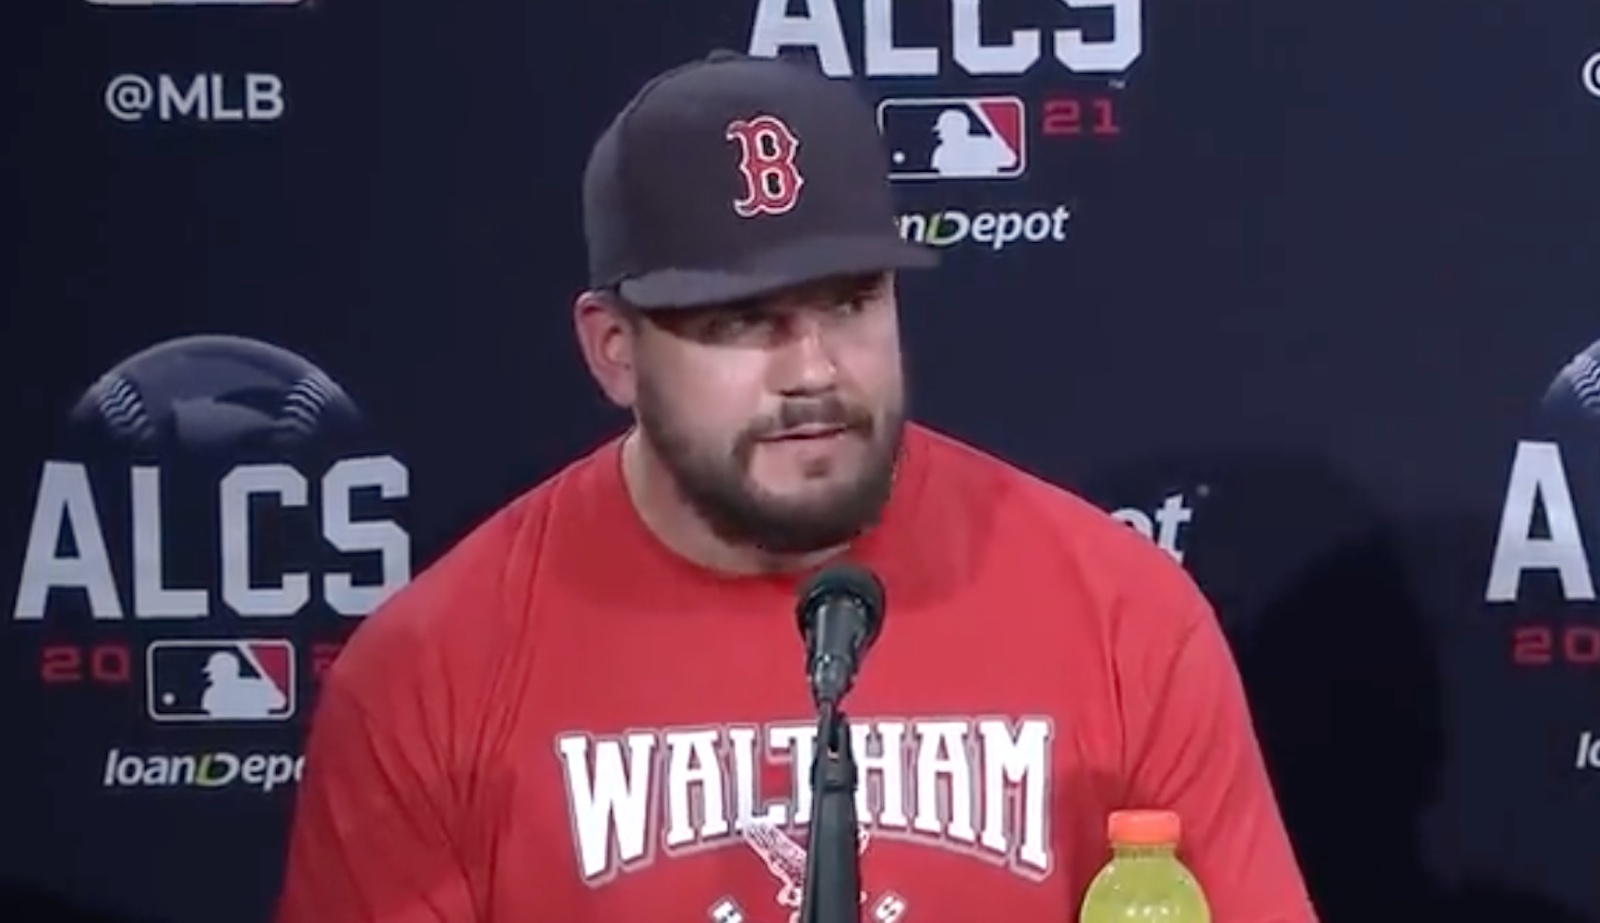 Why is Kyle Schwarber called 'Kyle from Waltham?'